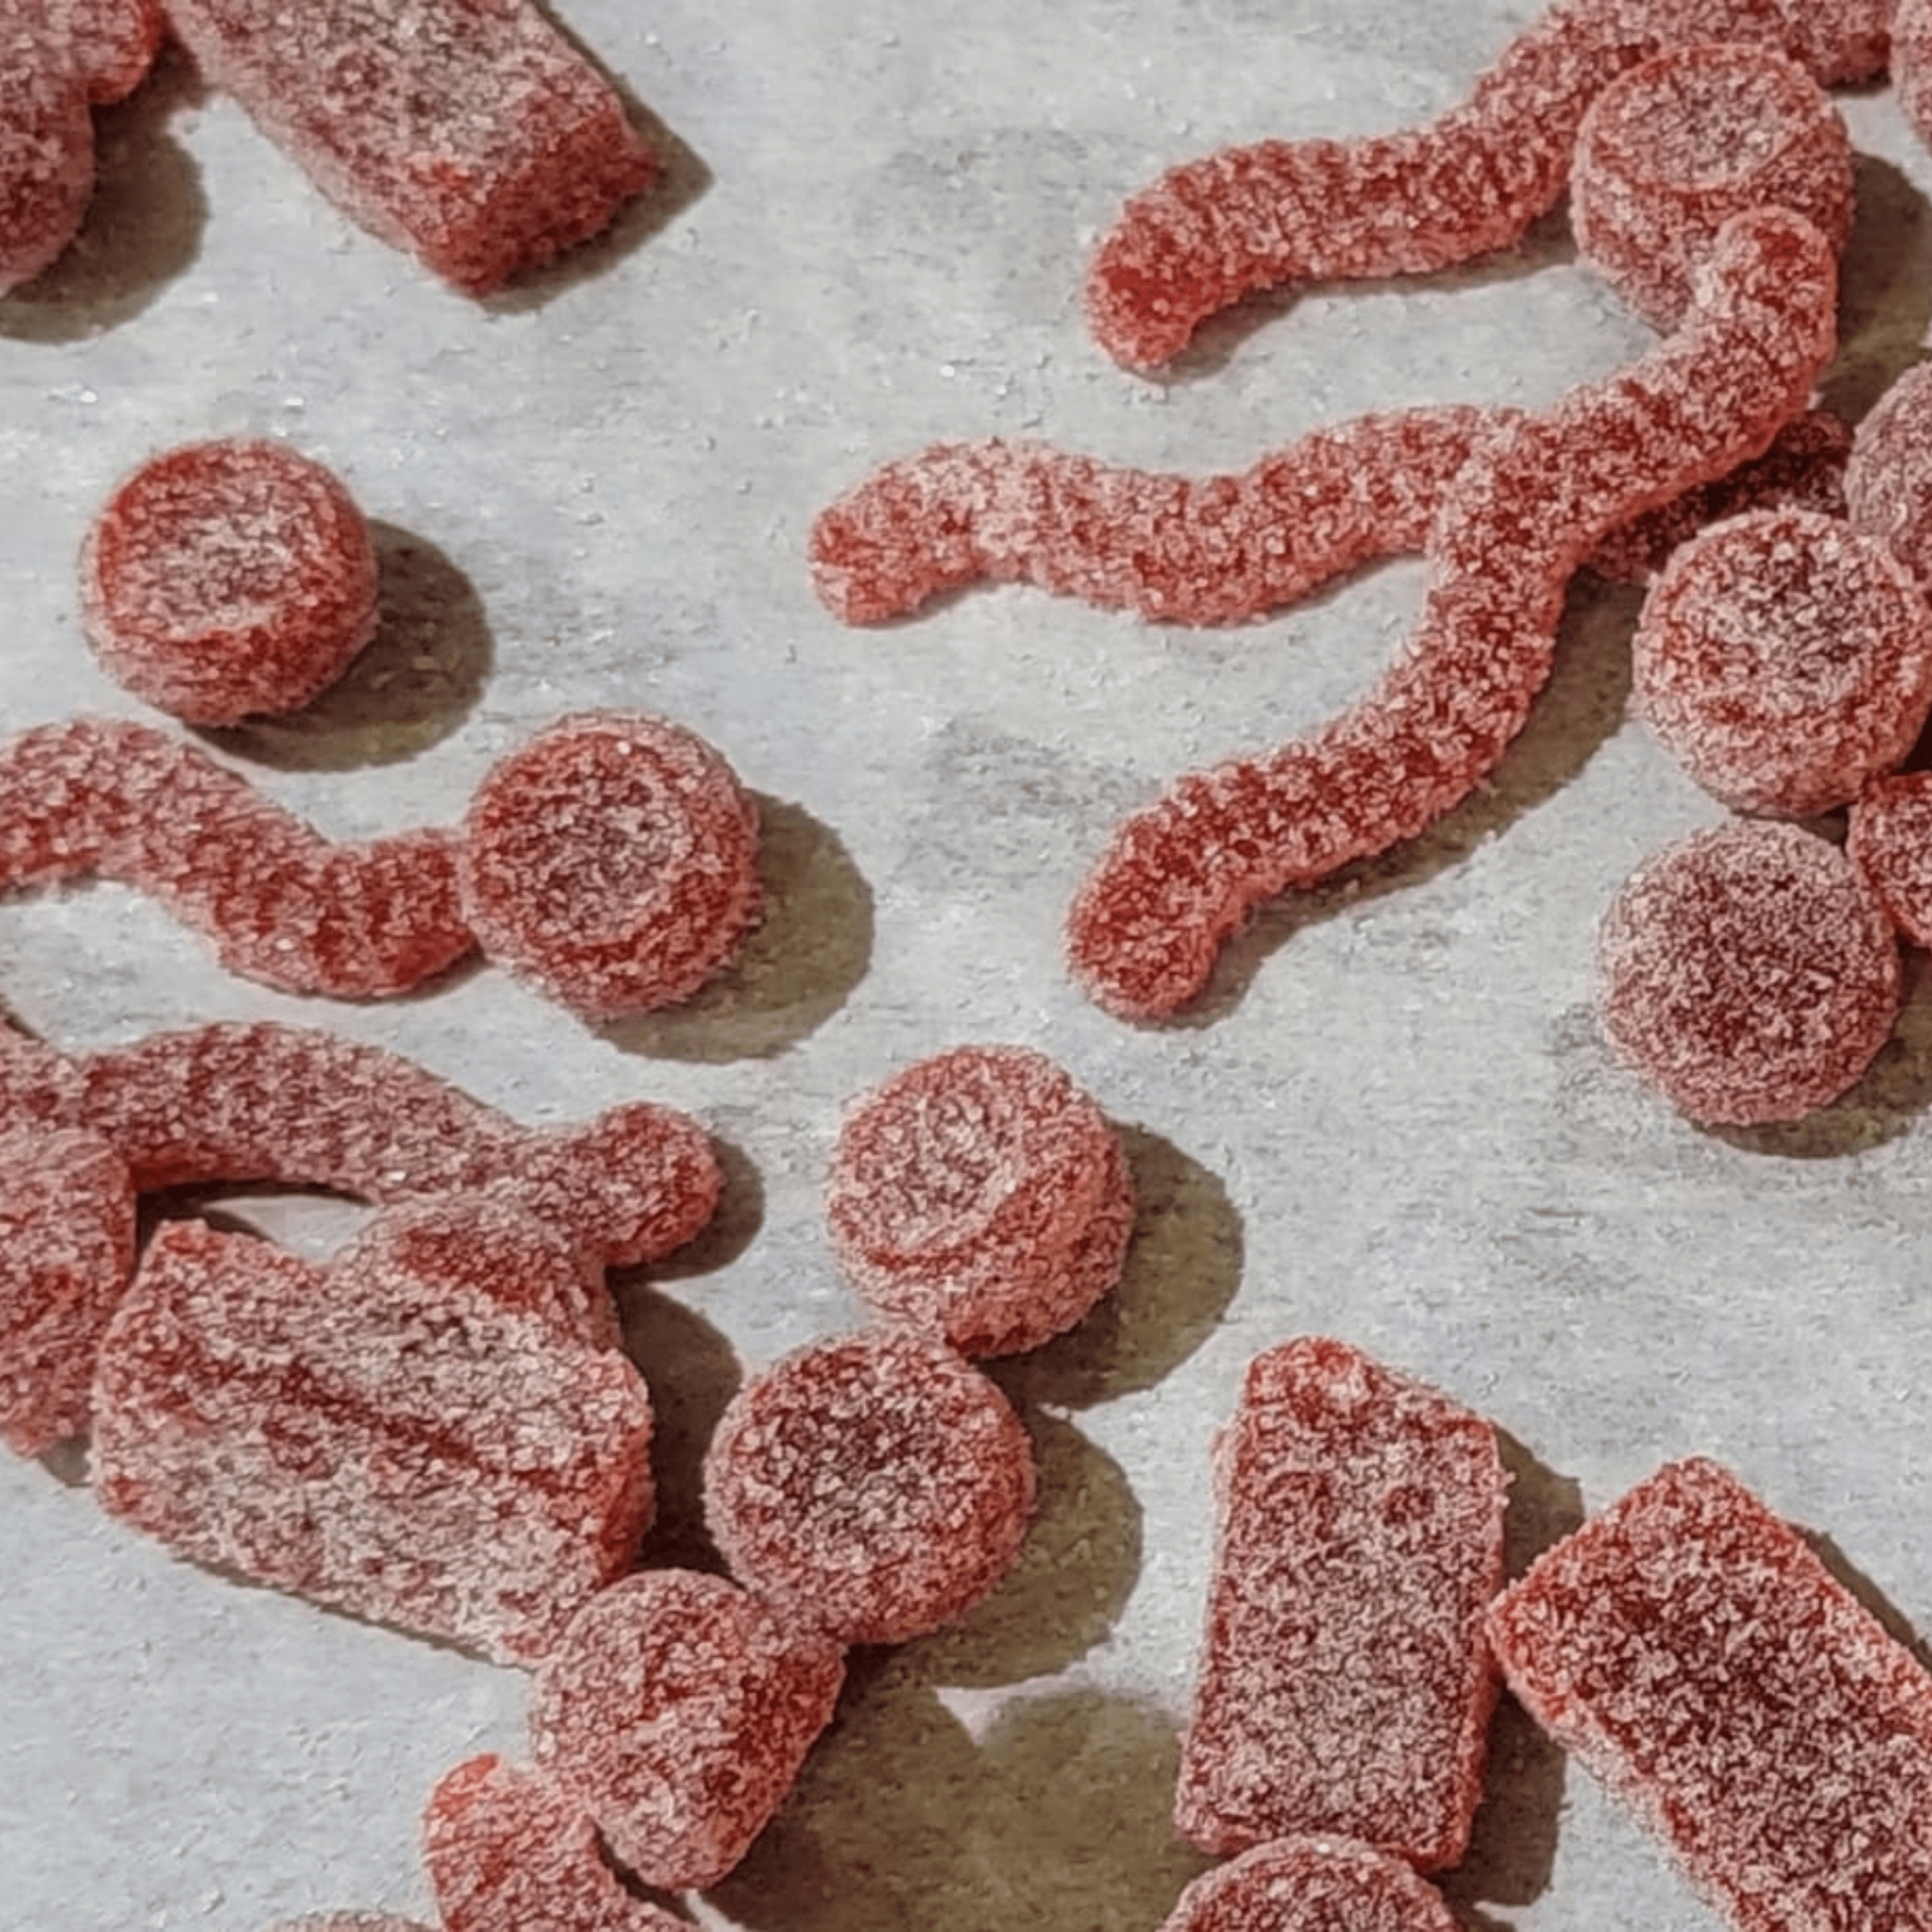 Keep your homemade gummies from sticking together with LEVO Sour Gummy Sugar! Unflavored Sour Gummy Sugar - Tangy powdered goodness to elevate any sweet treat.